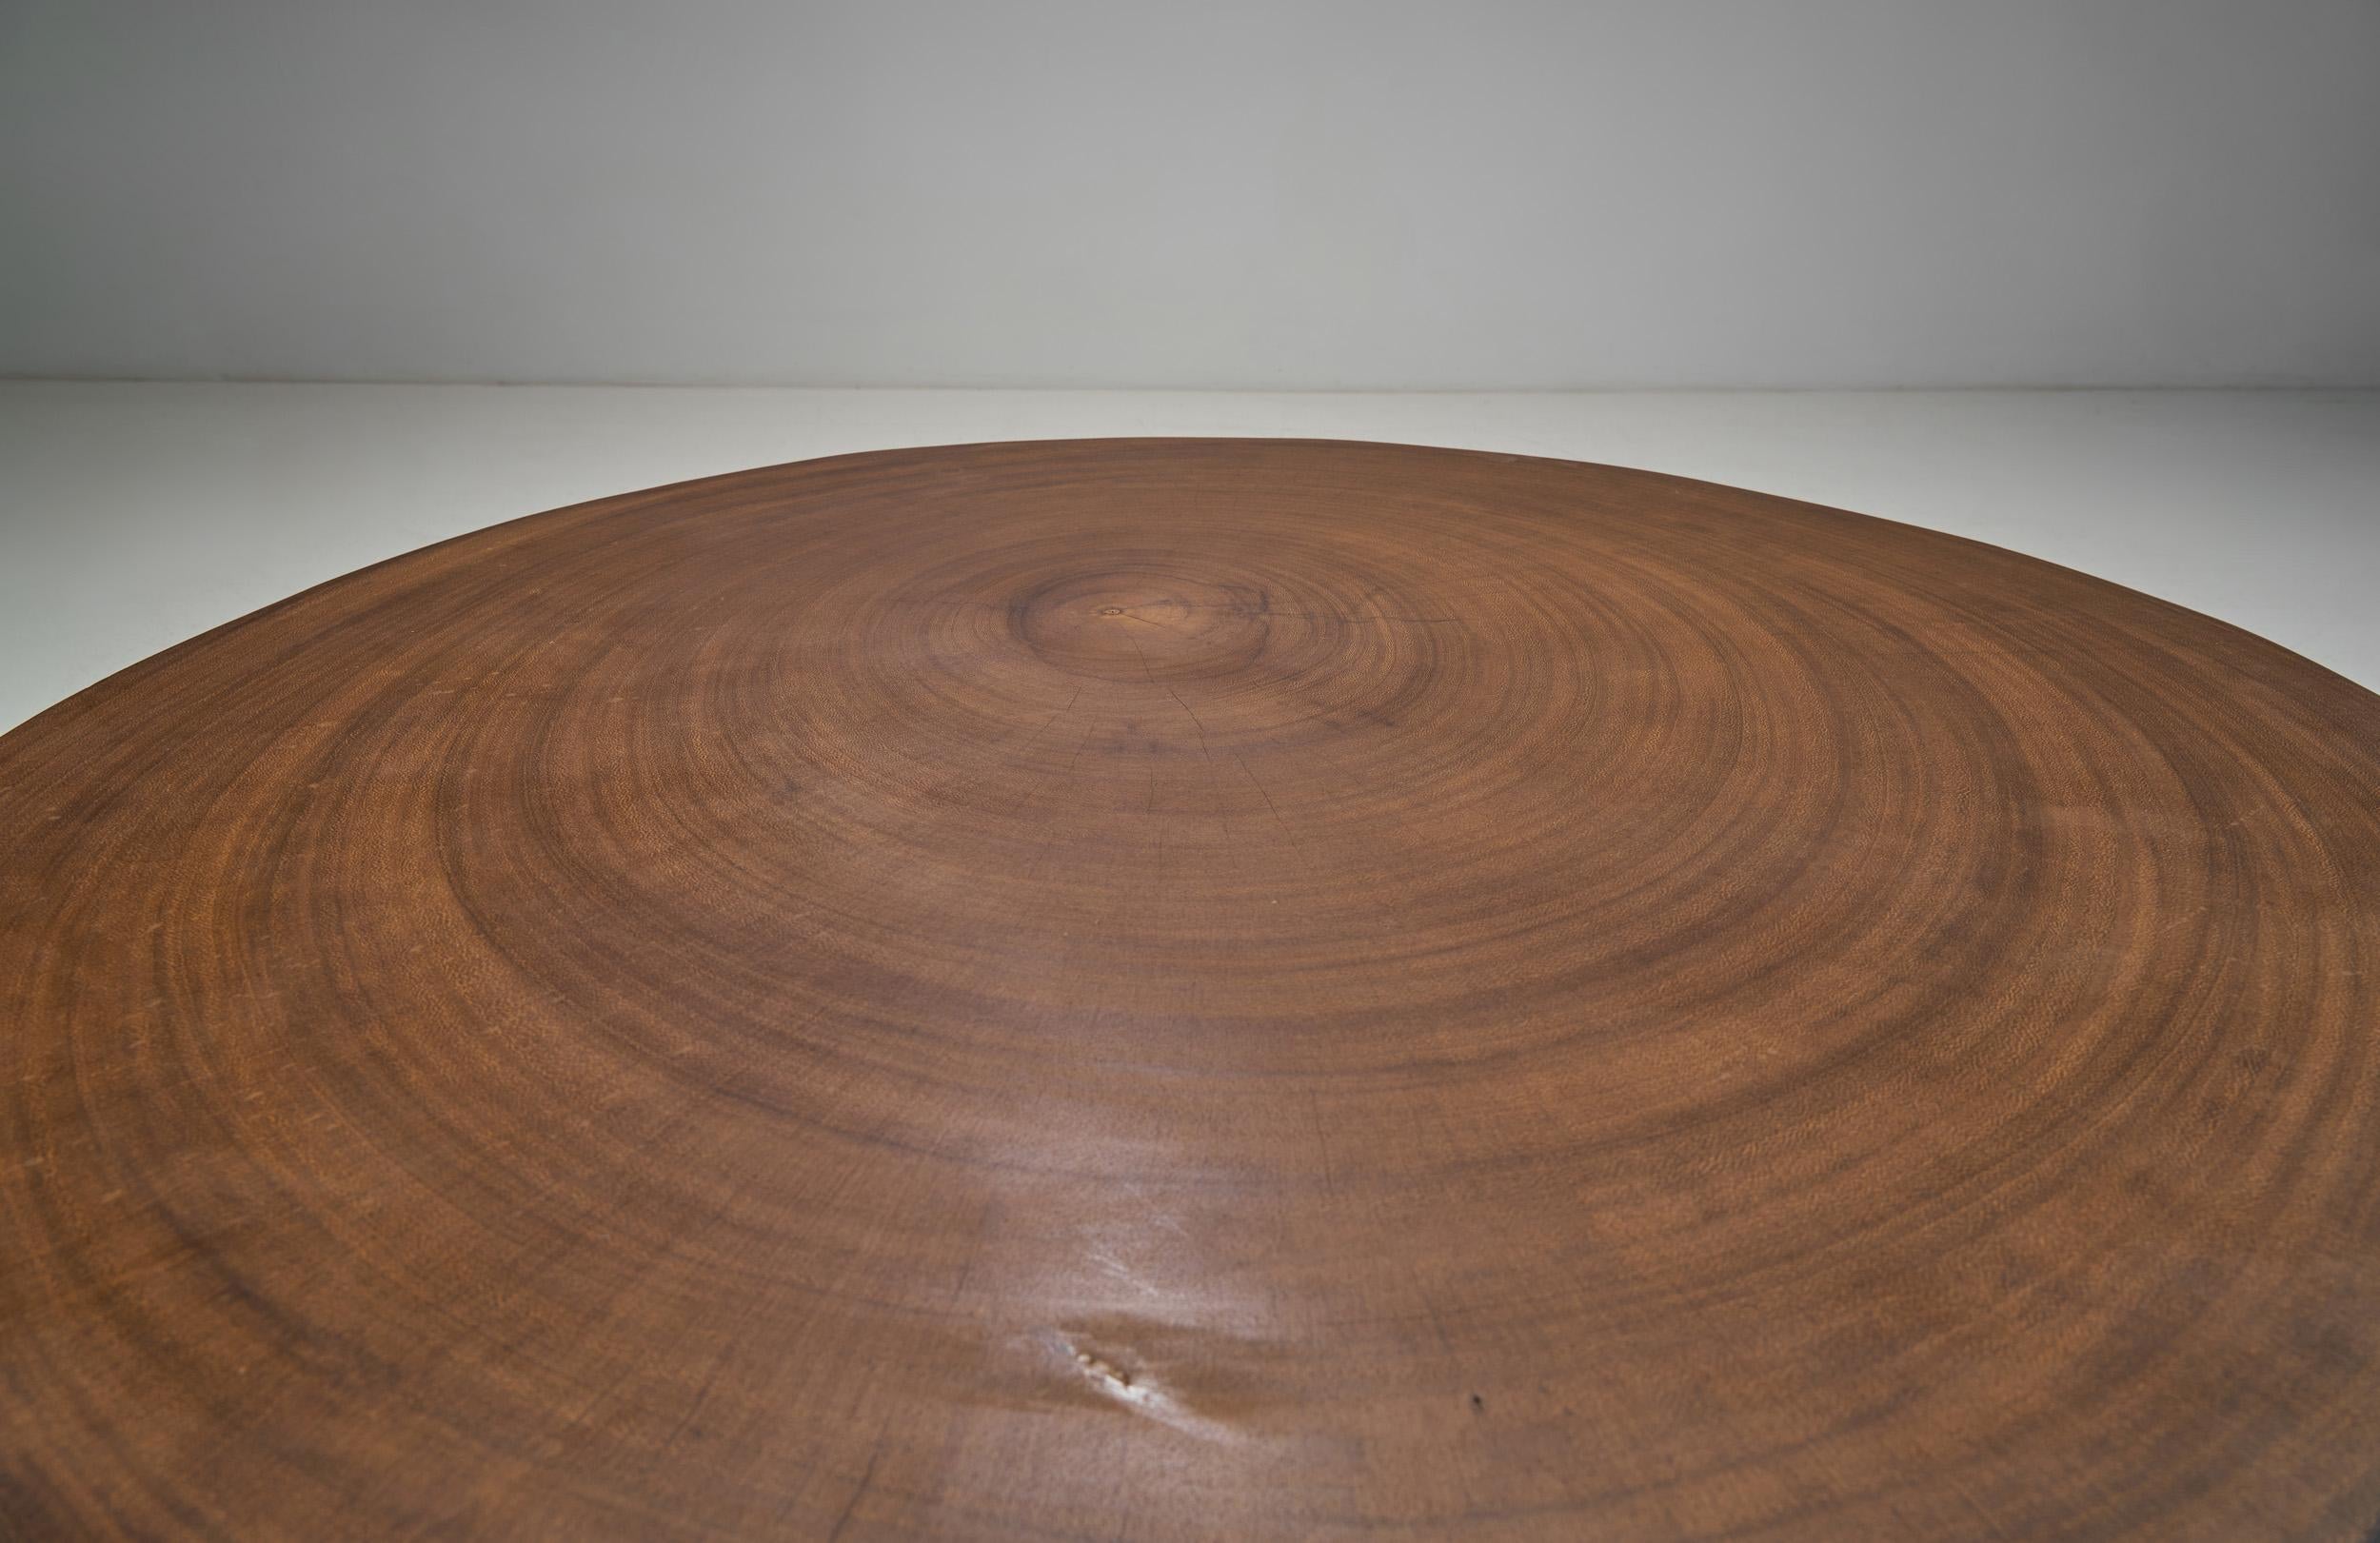 Midcentury Rustic Solid Wood Coffee Table, Europe, circa 1950s For Sale 2